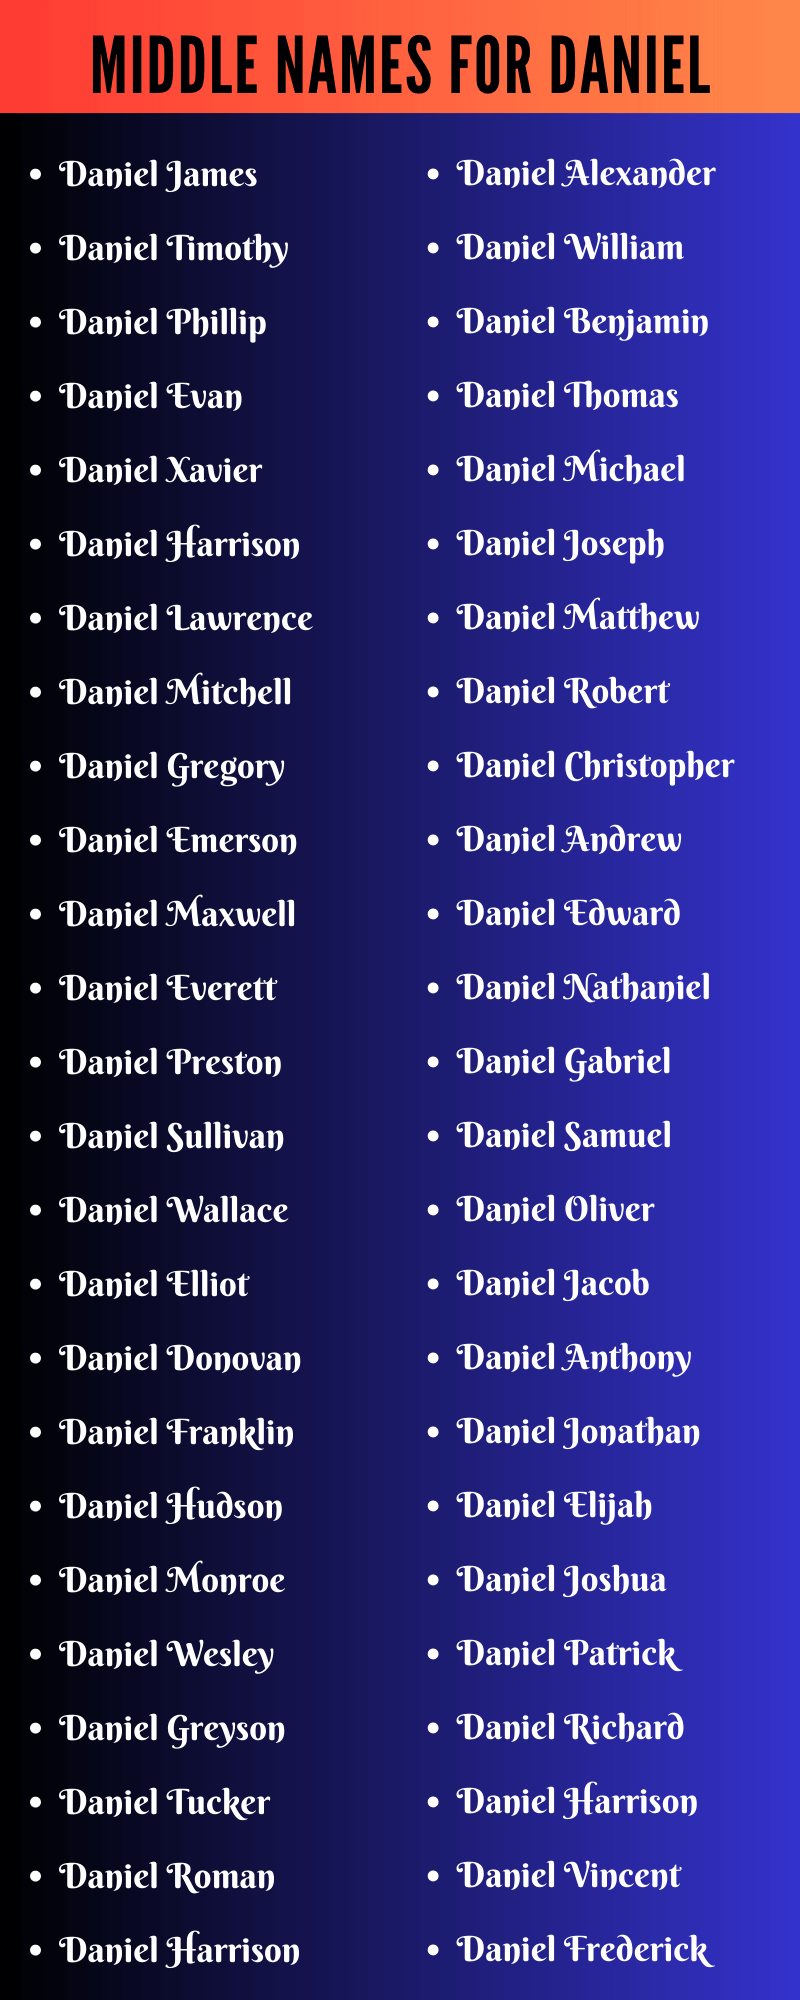 Middle Names For Daniel